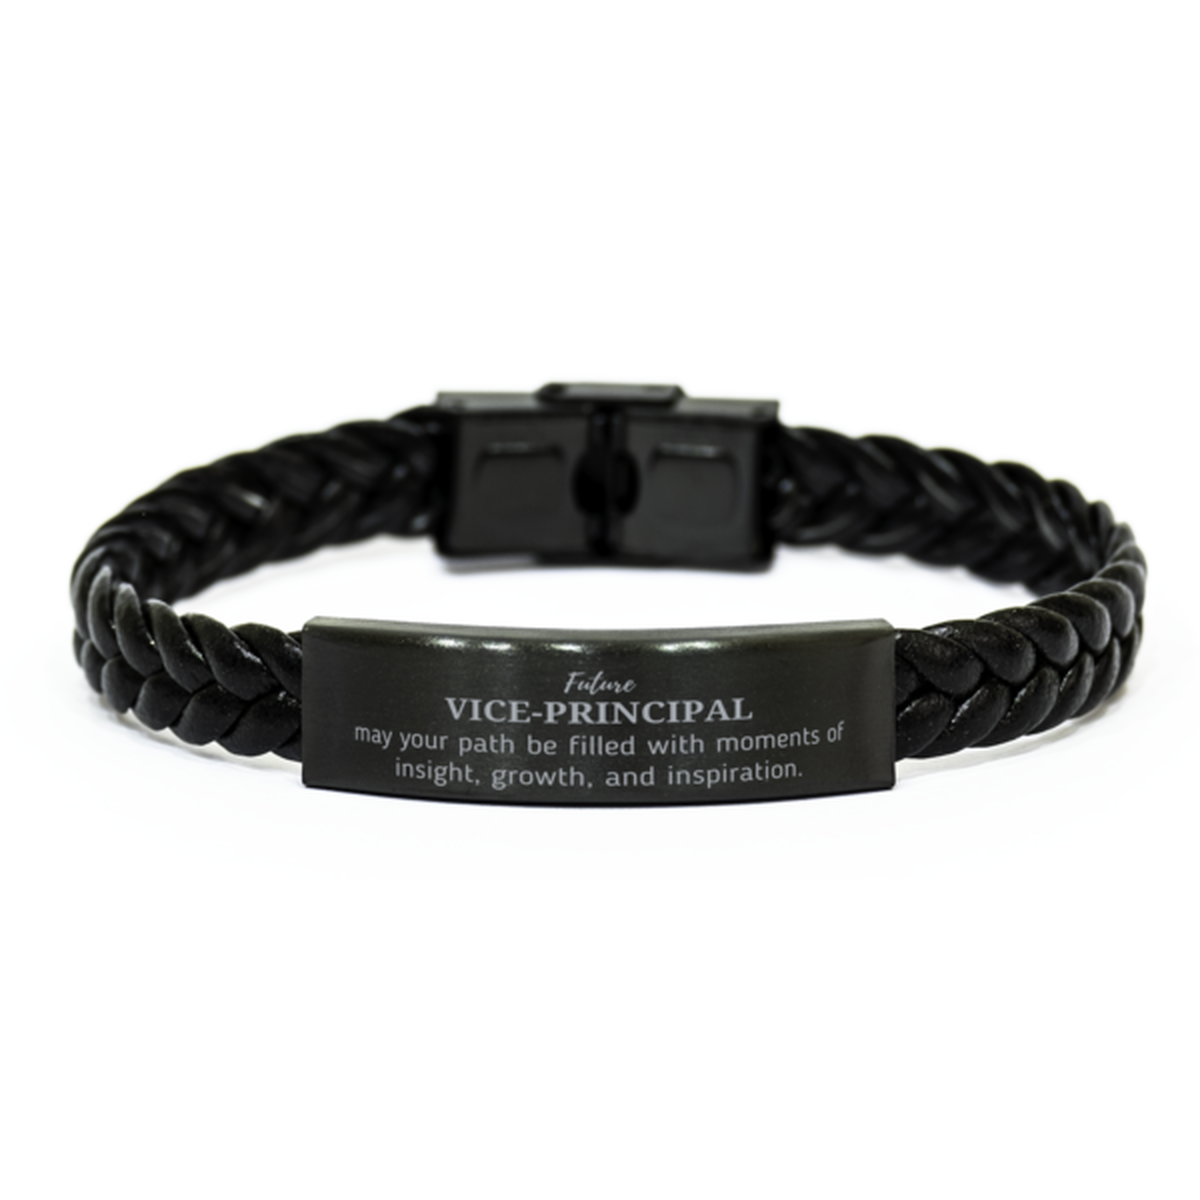 Future Vice-principal Gifts, May your path be filled with moments of insight, Graduation Gifts for New Vice-principal, Christmas Unique Braided Leather Bracelet For Men, Women, Friends